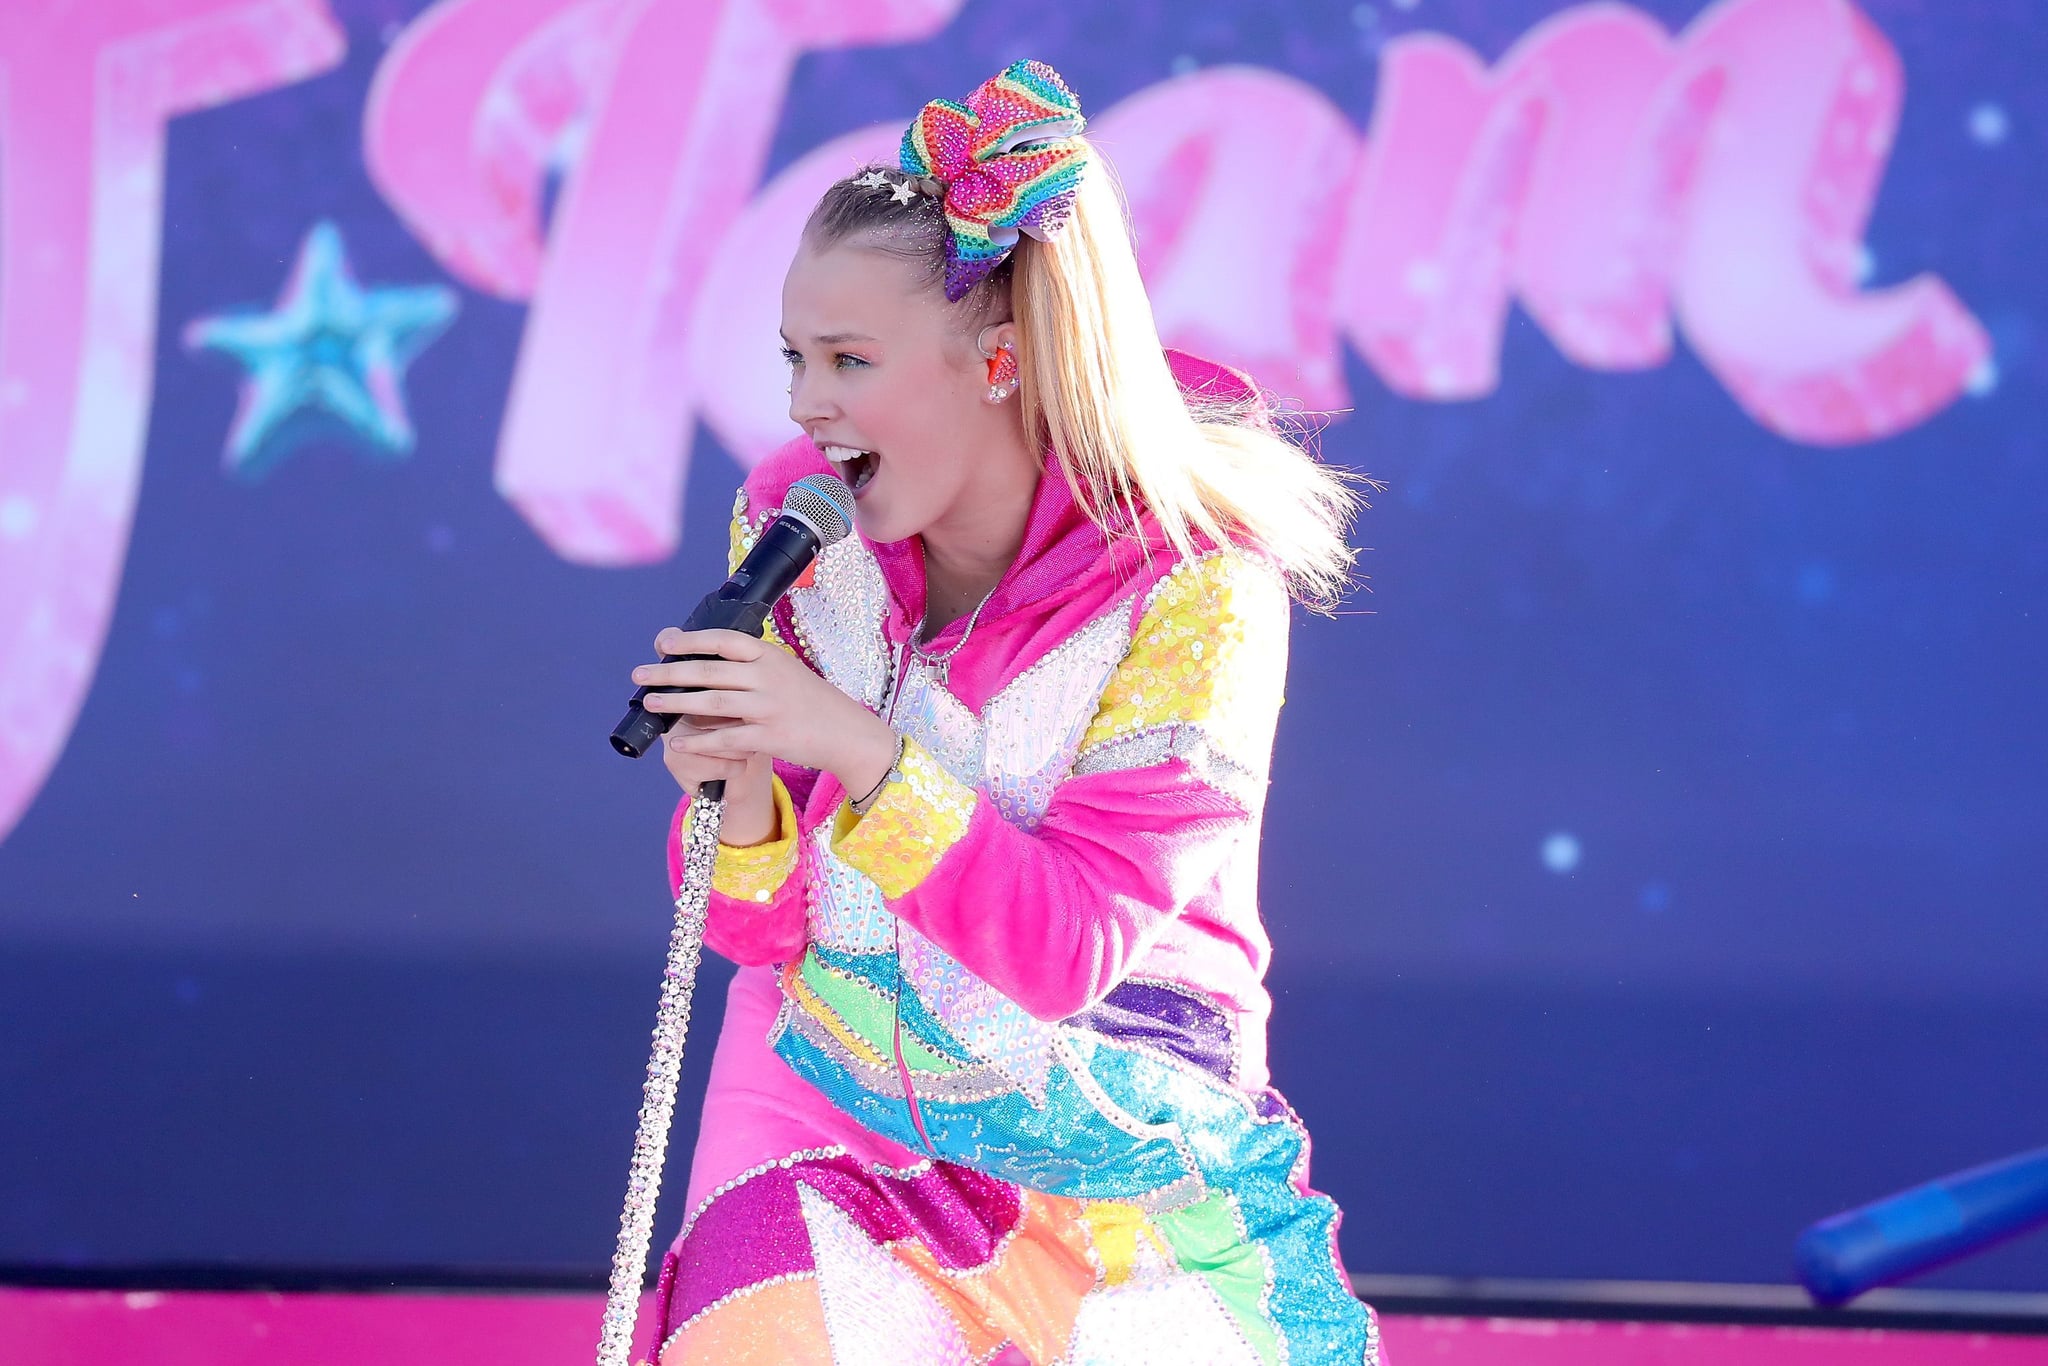 PASADENA, CALIFORNIA - SEPTEMBER 03: JoJo Siwa performs onstage during a drive-in screening and performance for the Paramount+ original movie